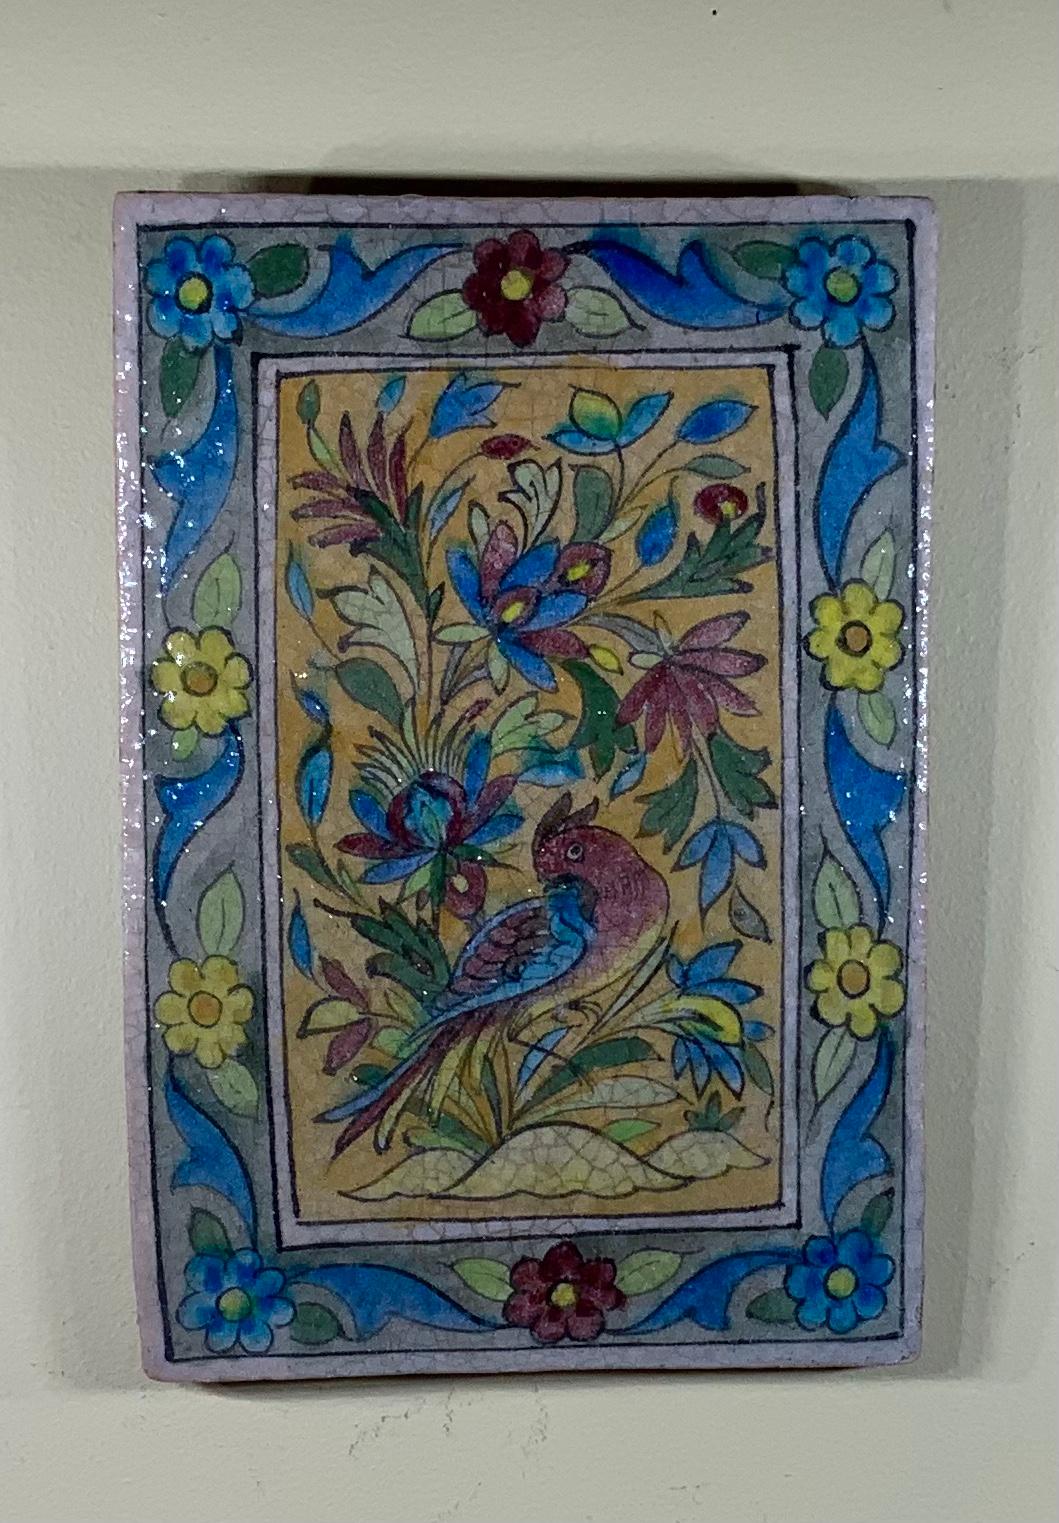 Exceptional tile all hand-painted and glazed with beautiful scenery of colorful bird vines and flowers on a camel color background. All surrounding by very intricate border. Could hang on the wall.
Great object of art for wall display.

 